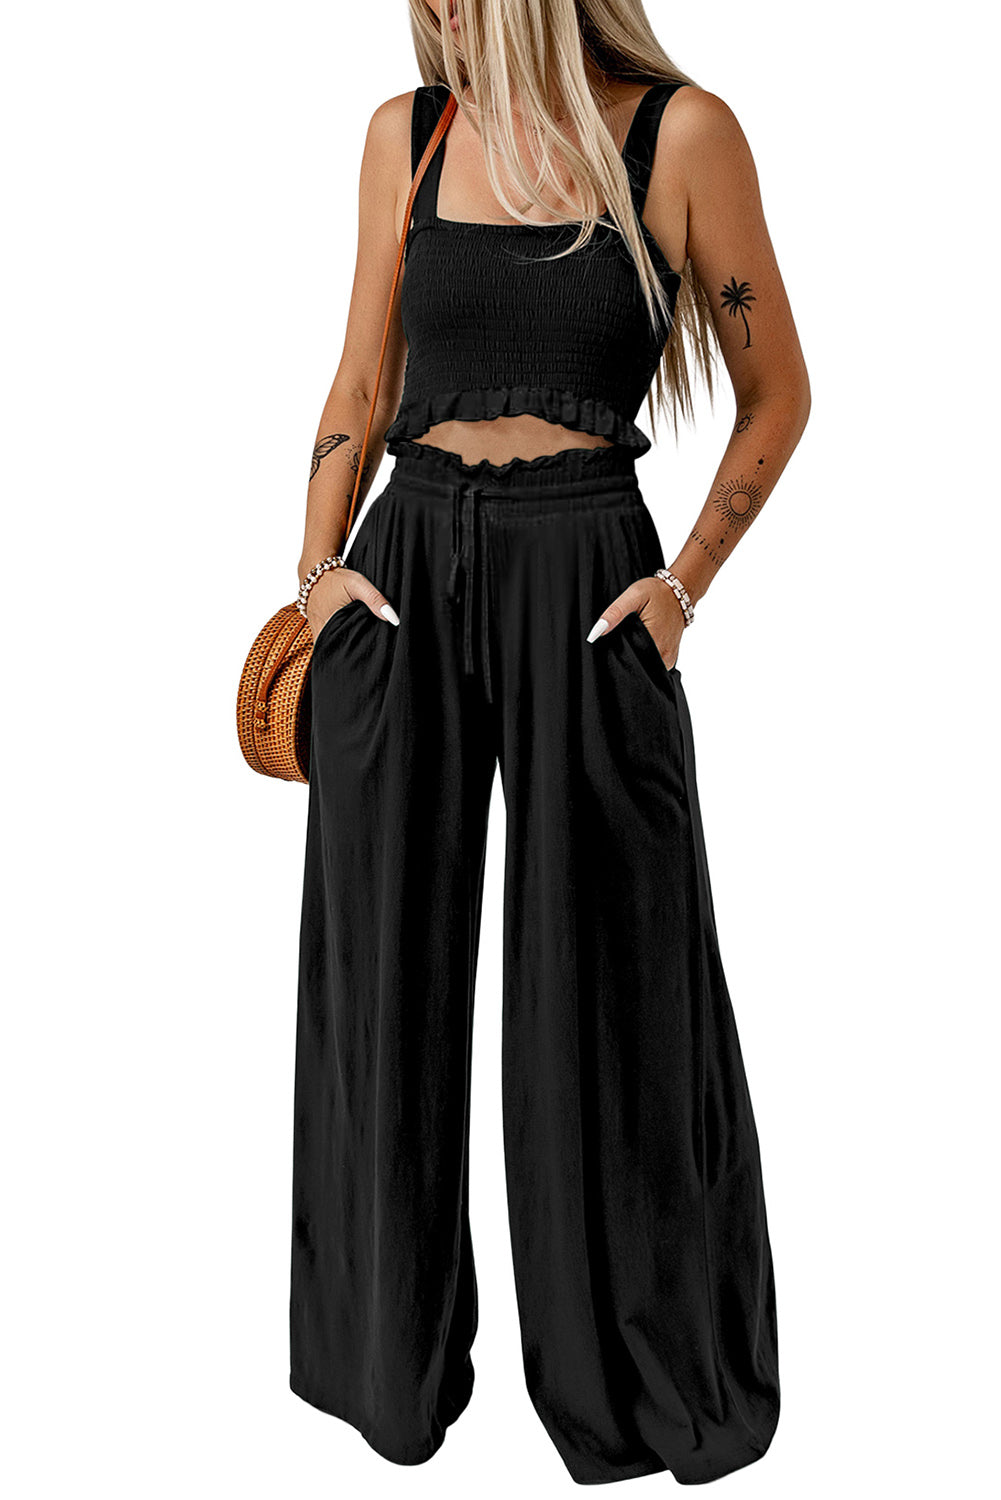 Square Neck Cropped Tank Top and Long Pants Set Trendsi